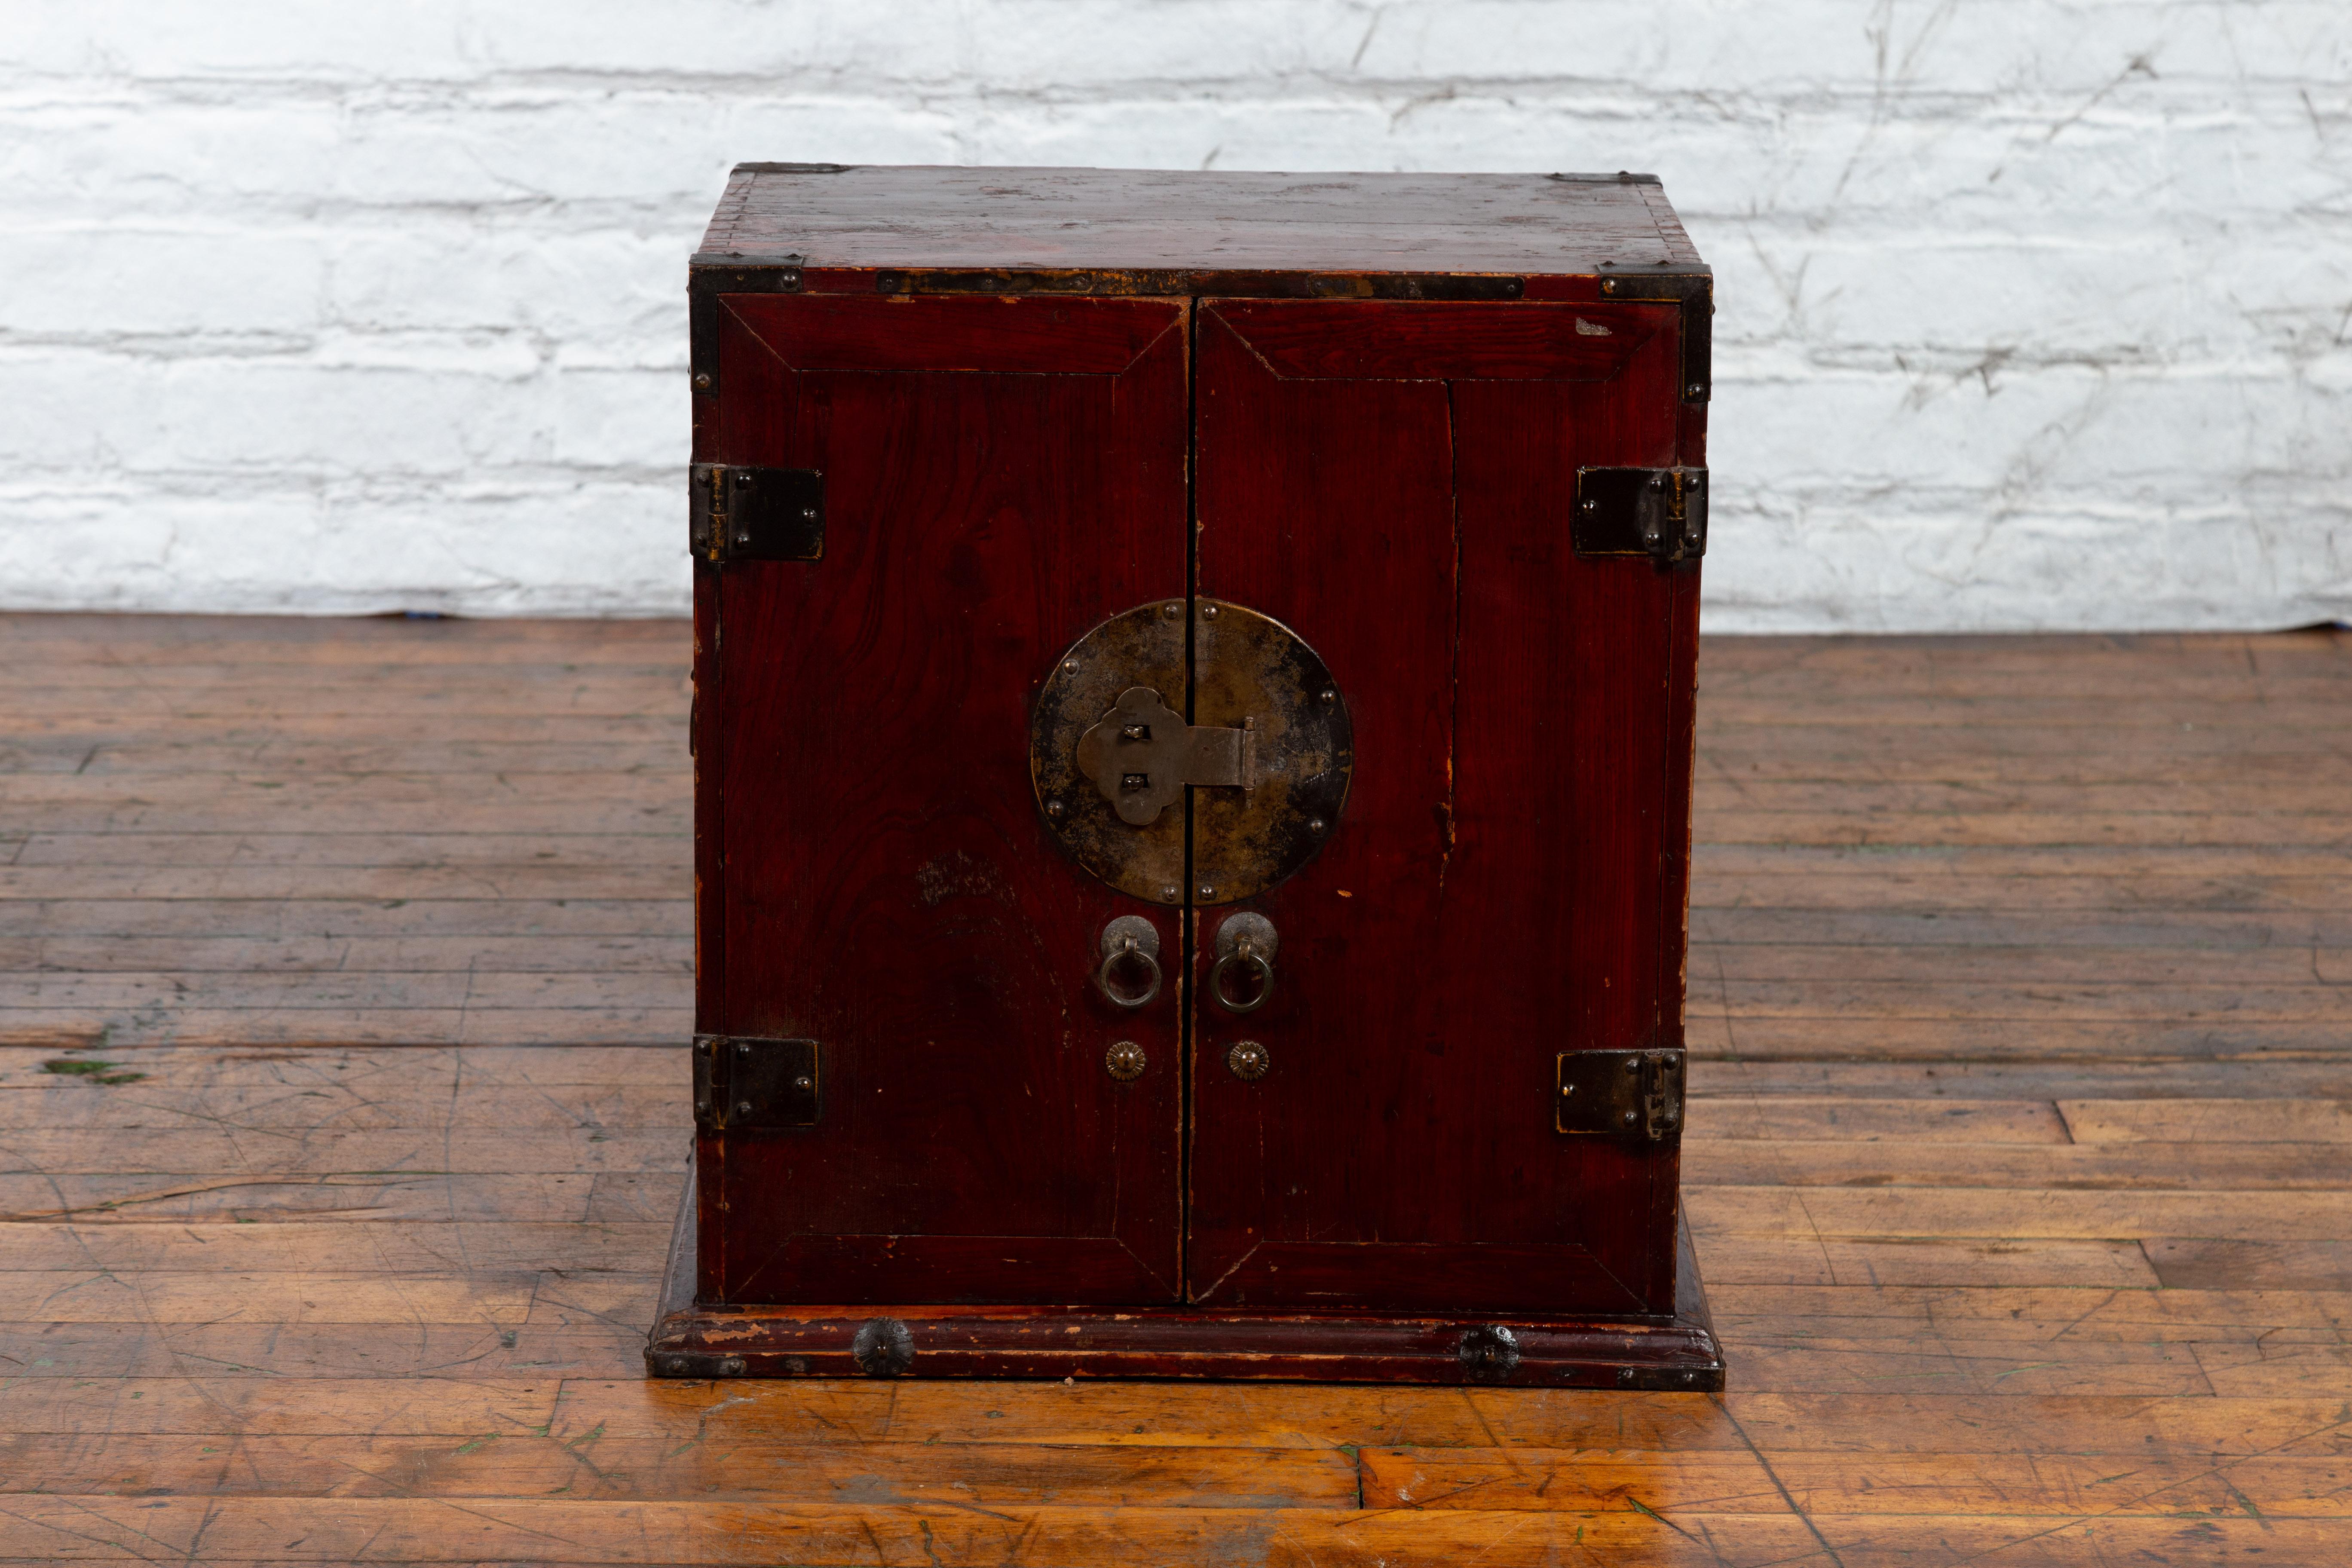 An antique Chinese dark red carrying chest from the early 20th century, with side handles. Created in China during the early years of the 20th century, this carrying chest features a linear silhouette perfectly complimented by a dark red patina. Two